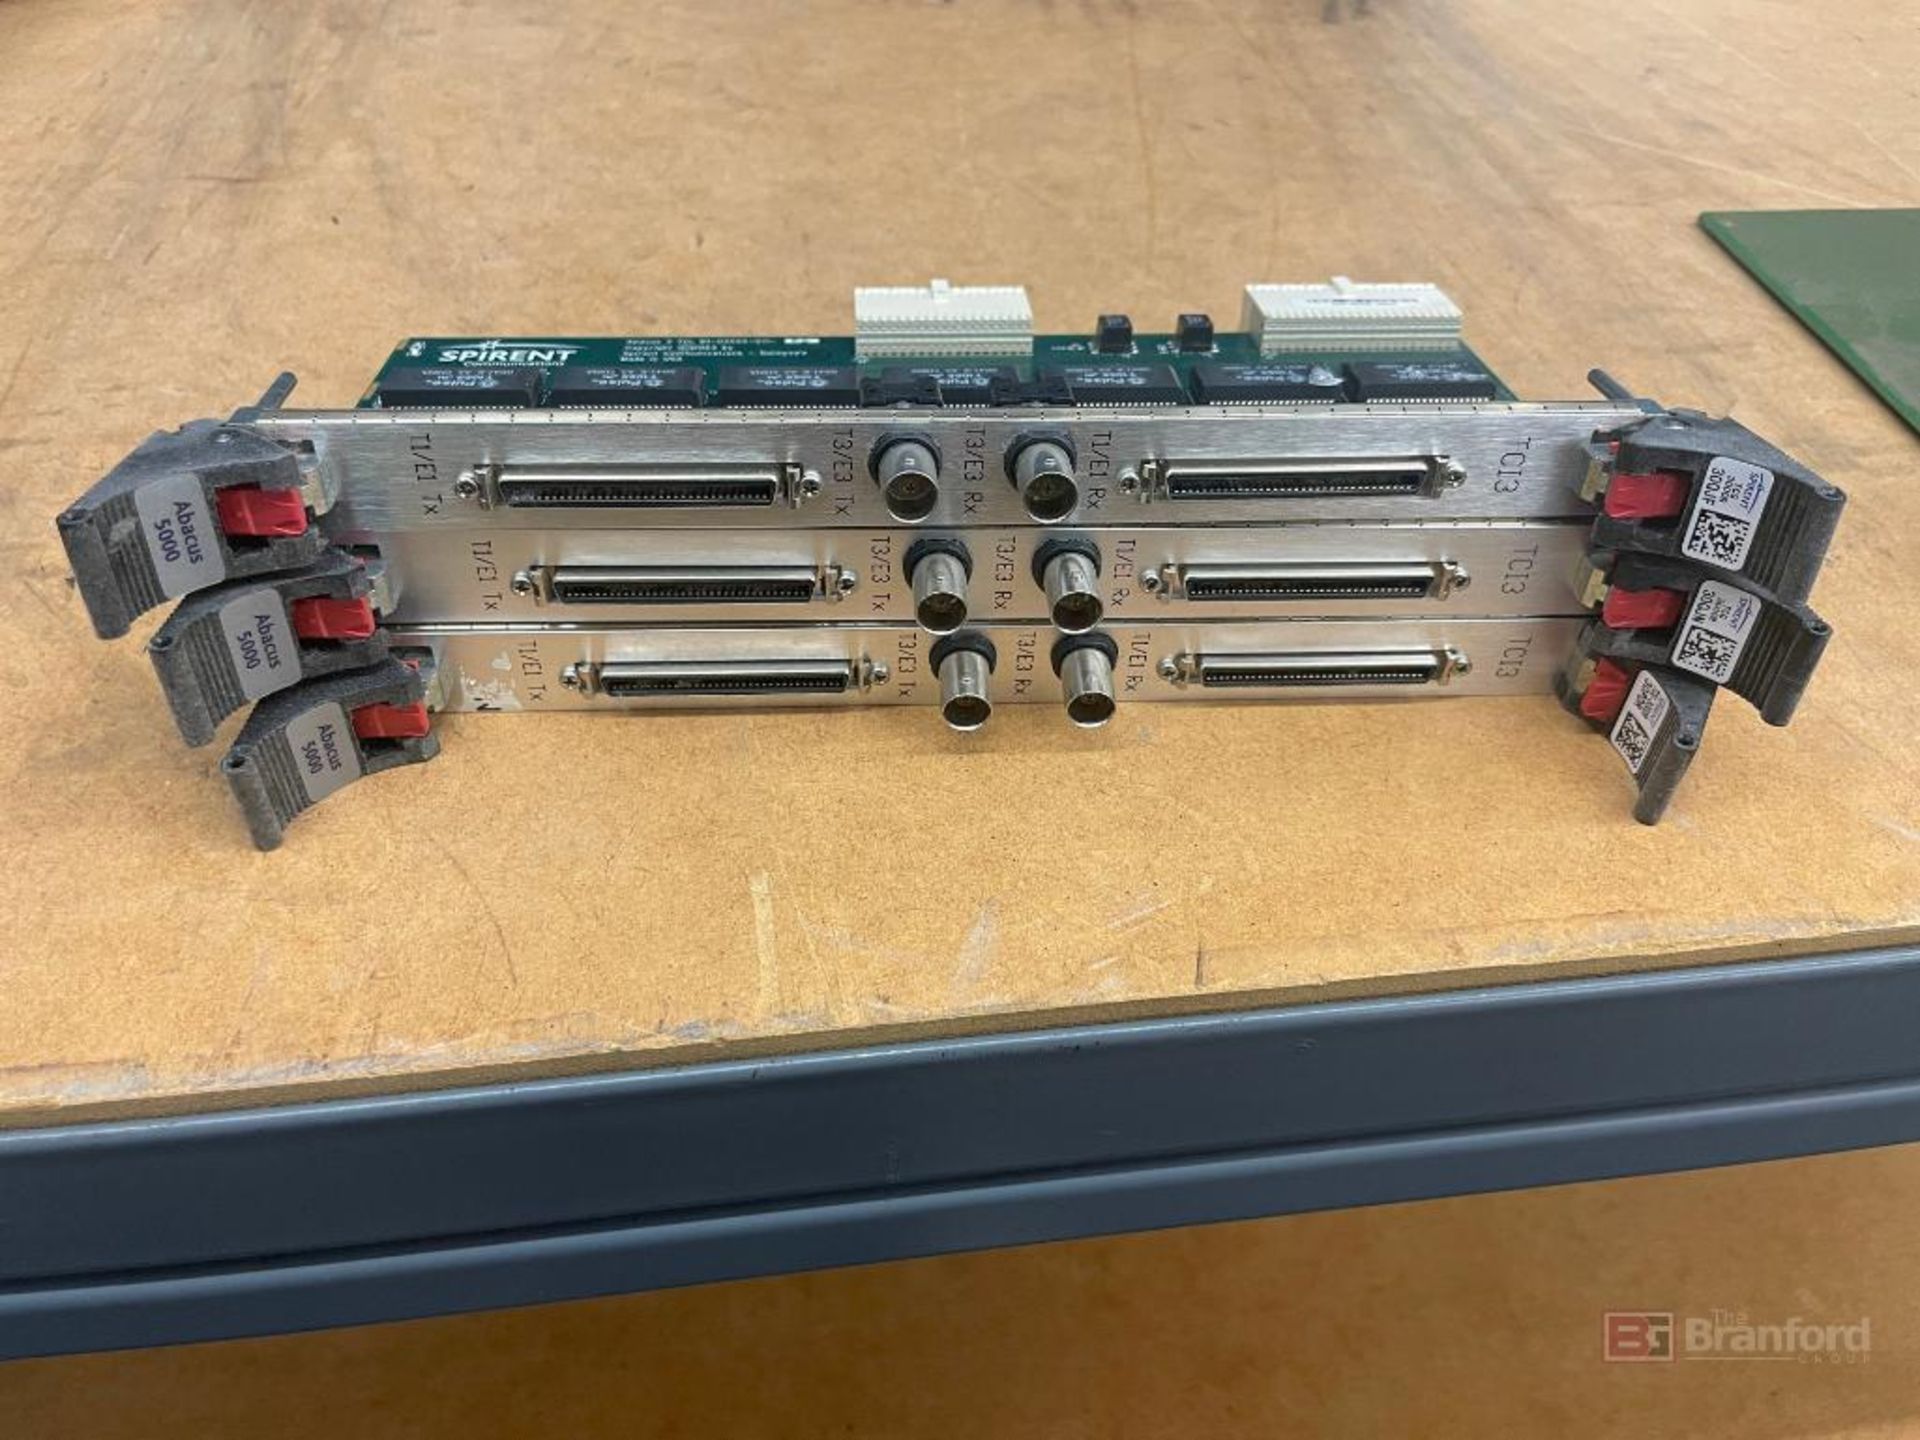 Lot of Spirent Abacus Subsystems - Image 9 of 13